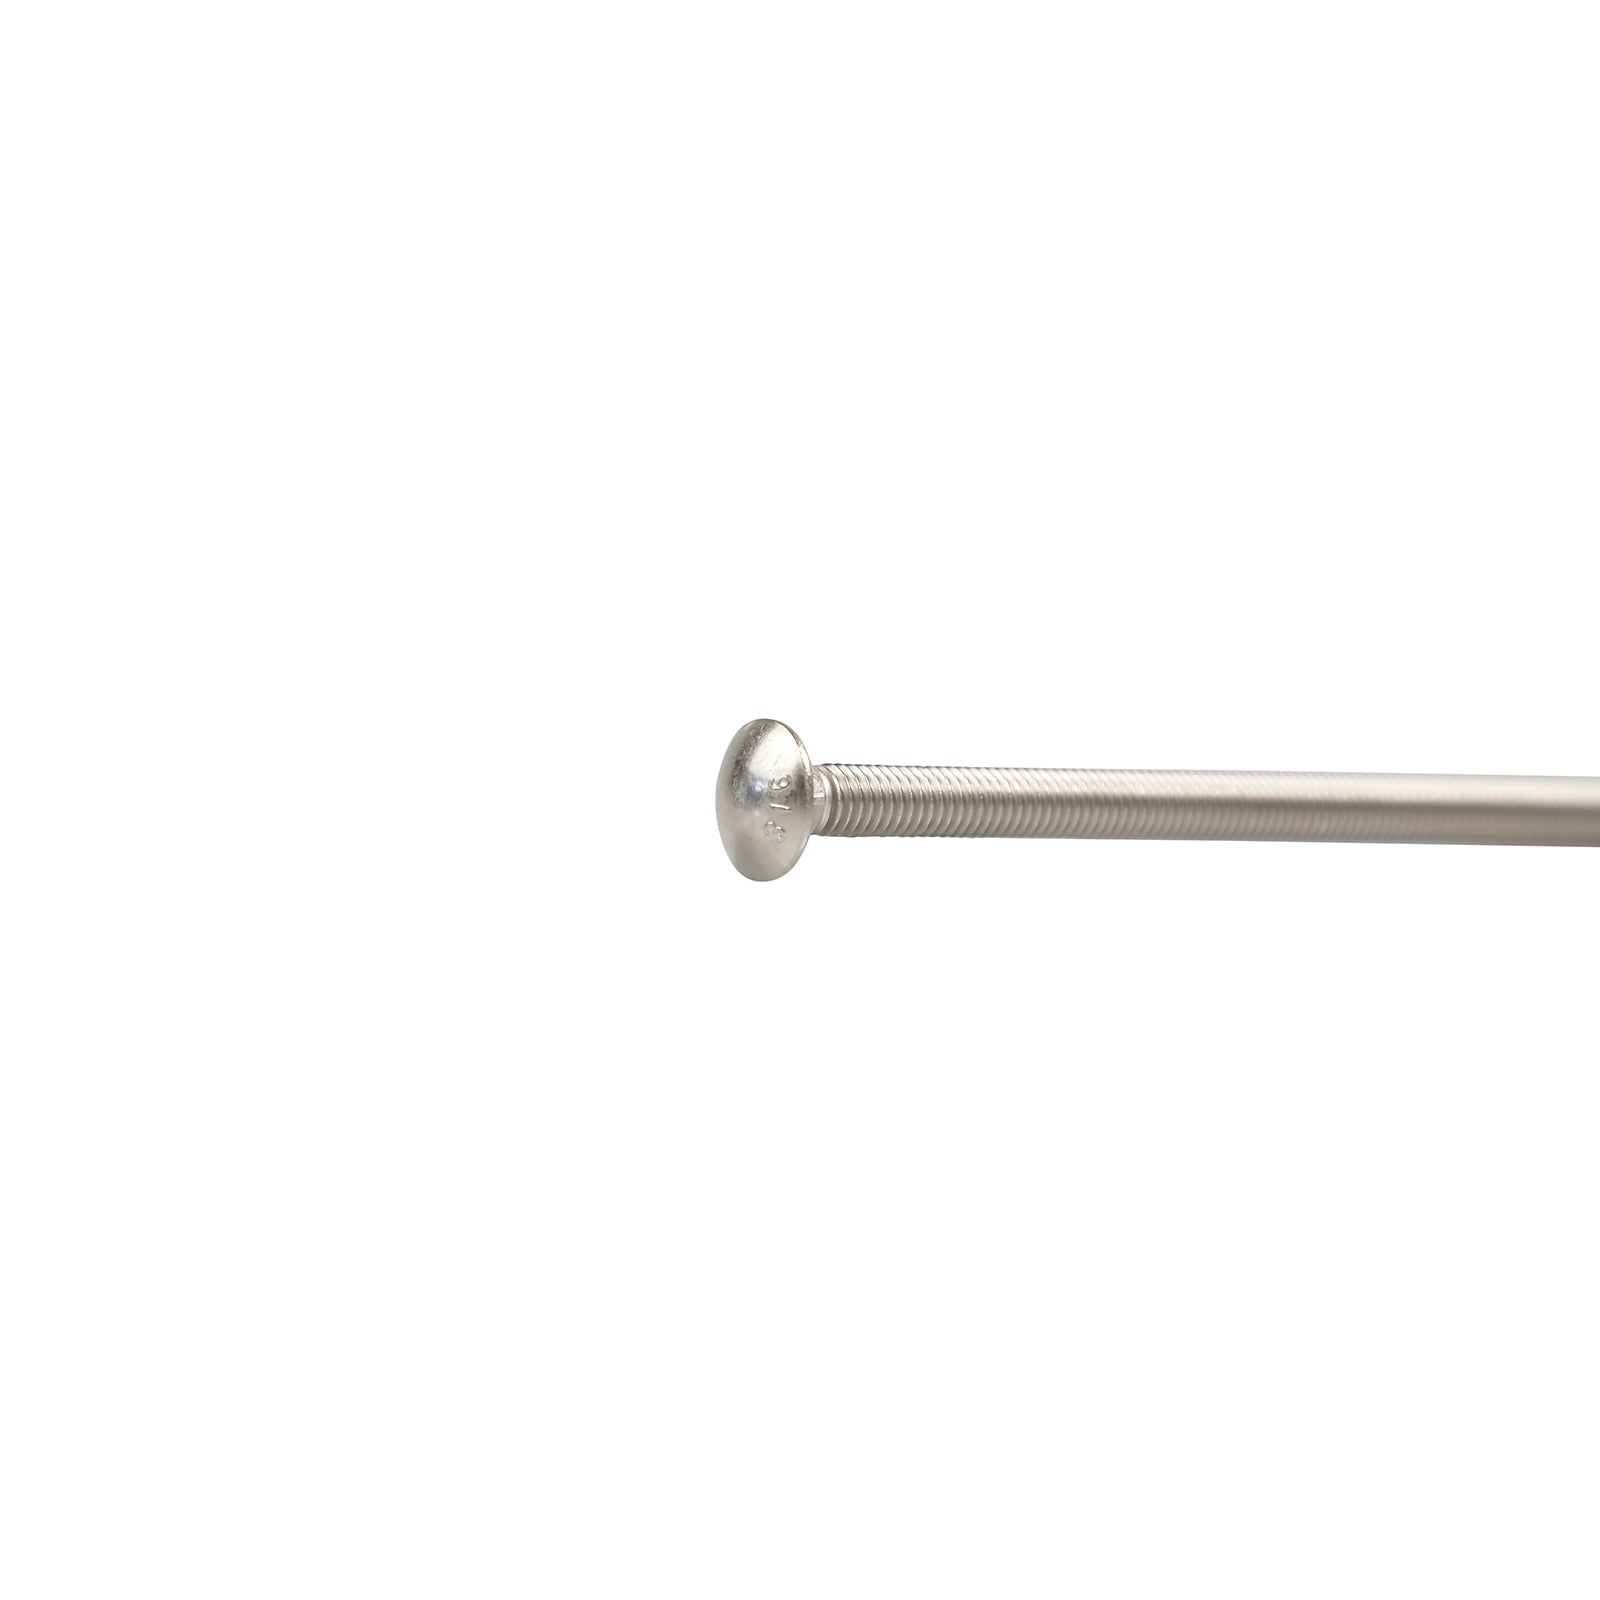 3/8"-16 x 6" Conquest Carriage Bolt - 316 Stainless Steel